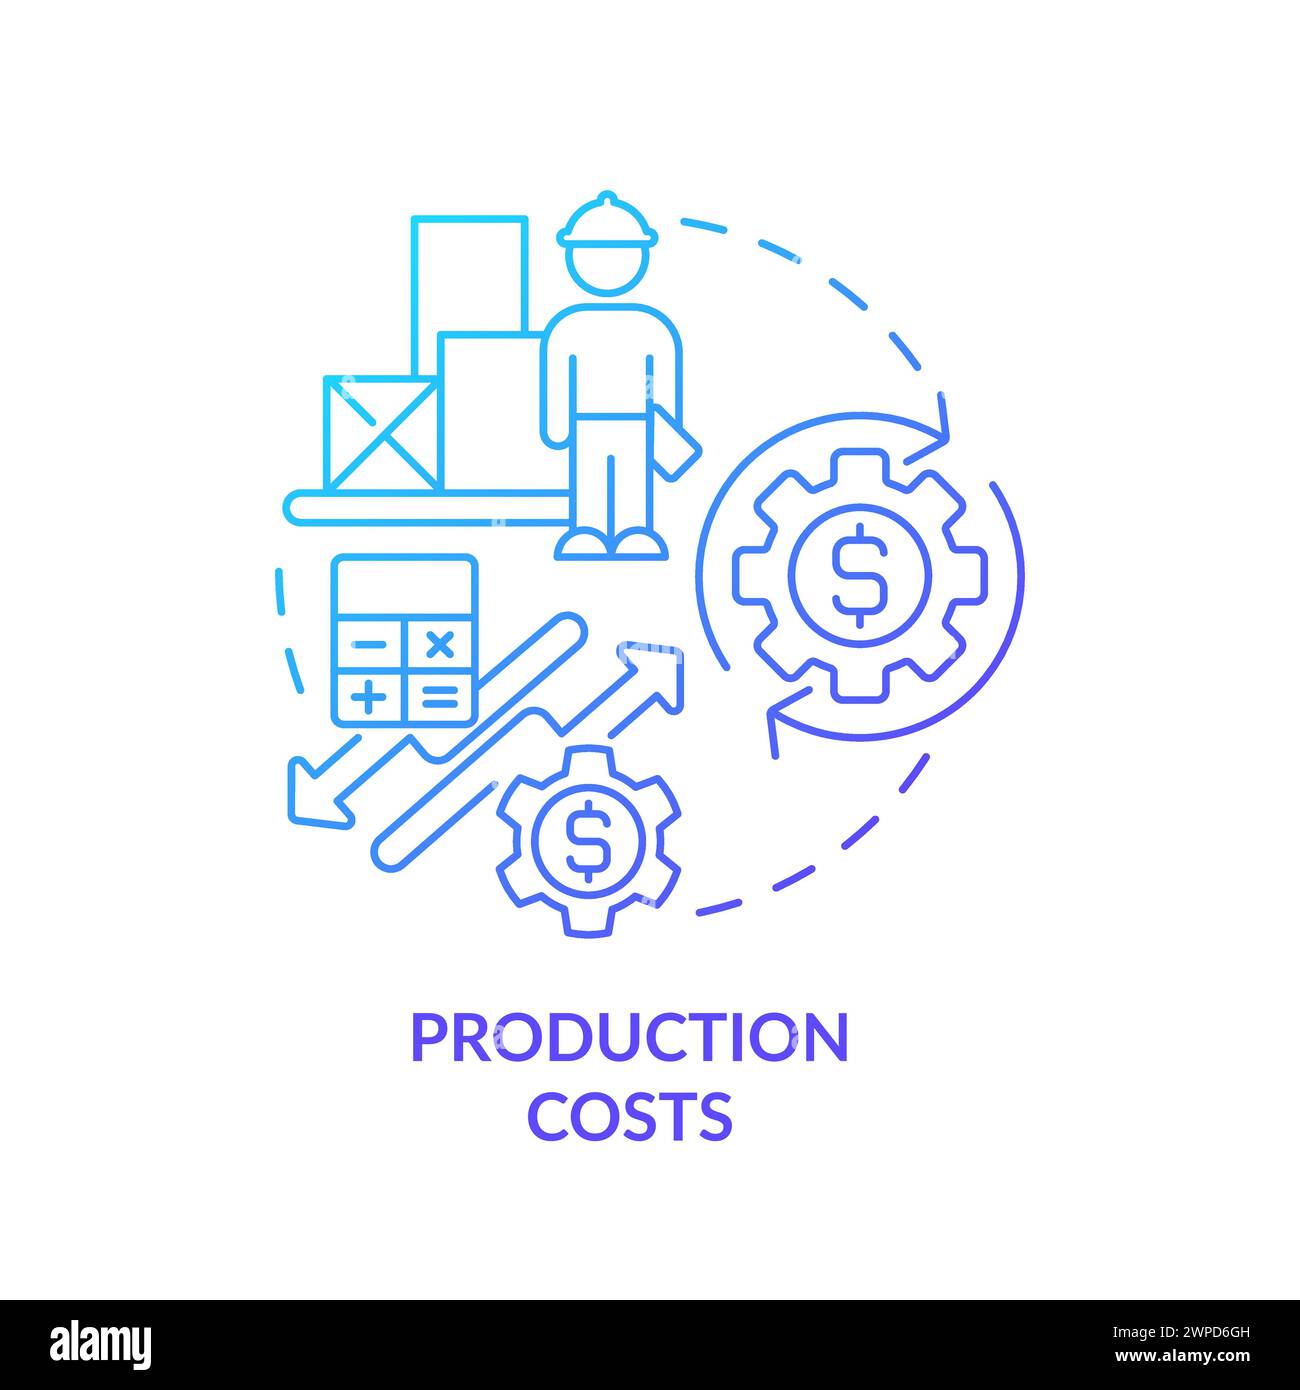 Production costs blue gradient concept icon Stock Vector